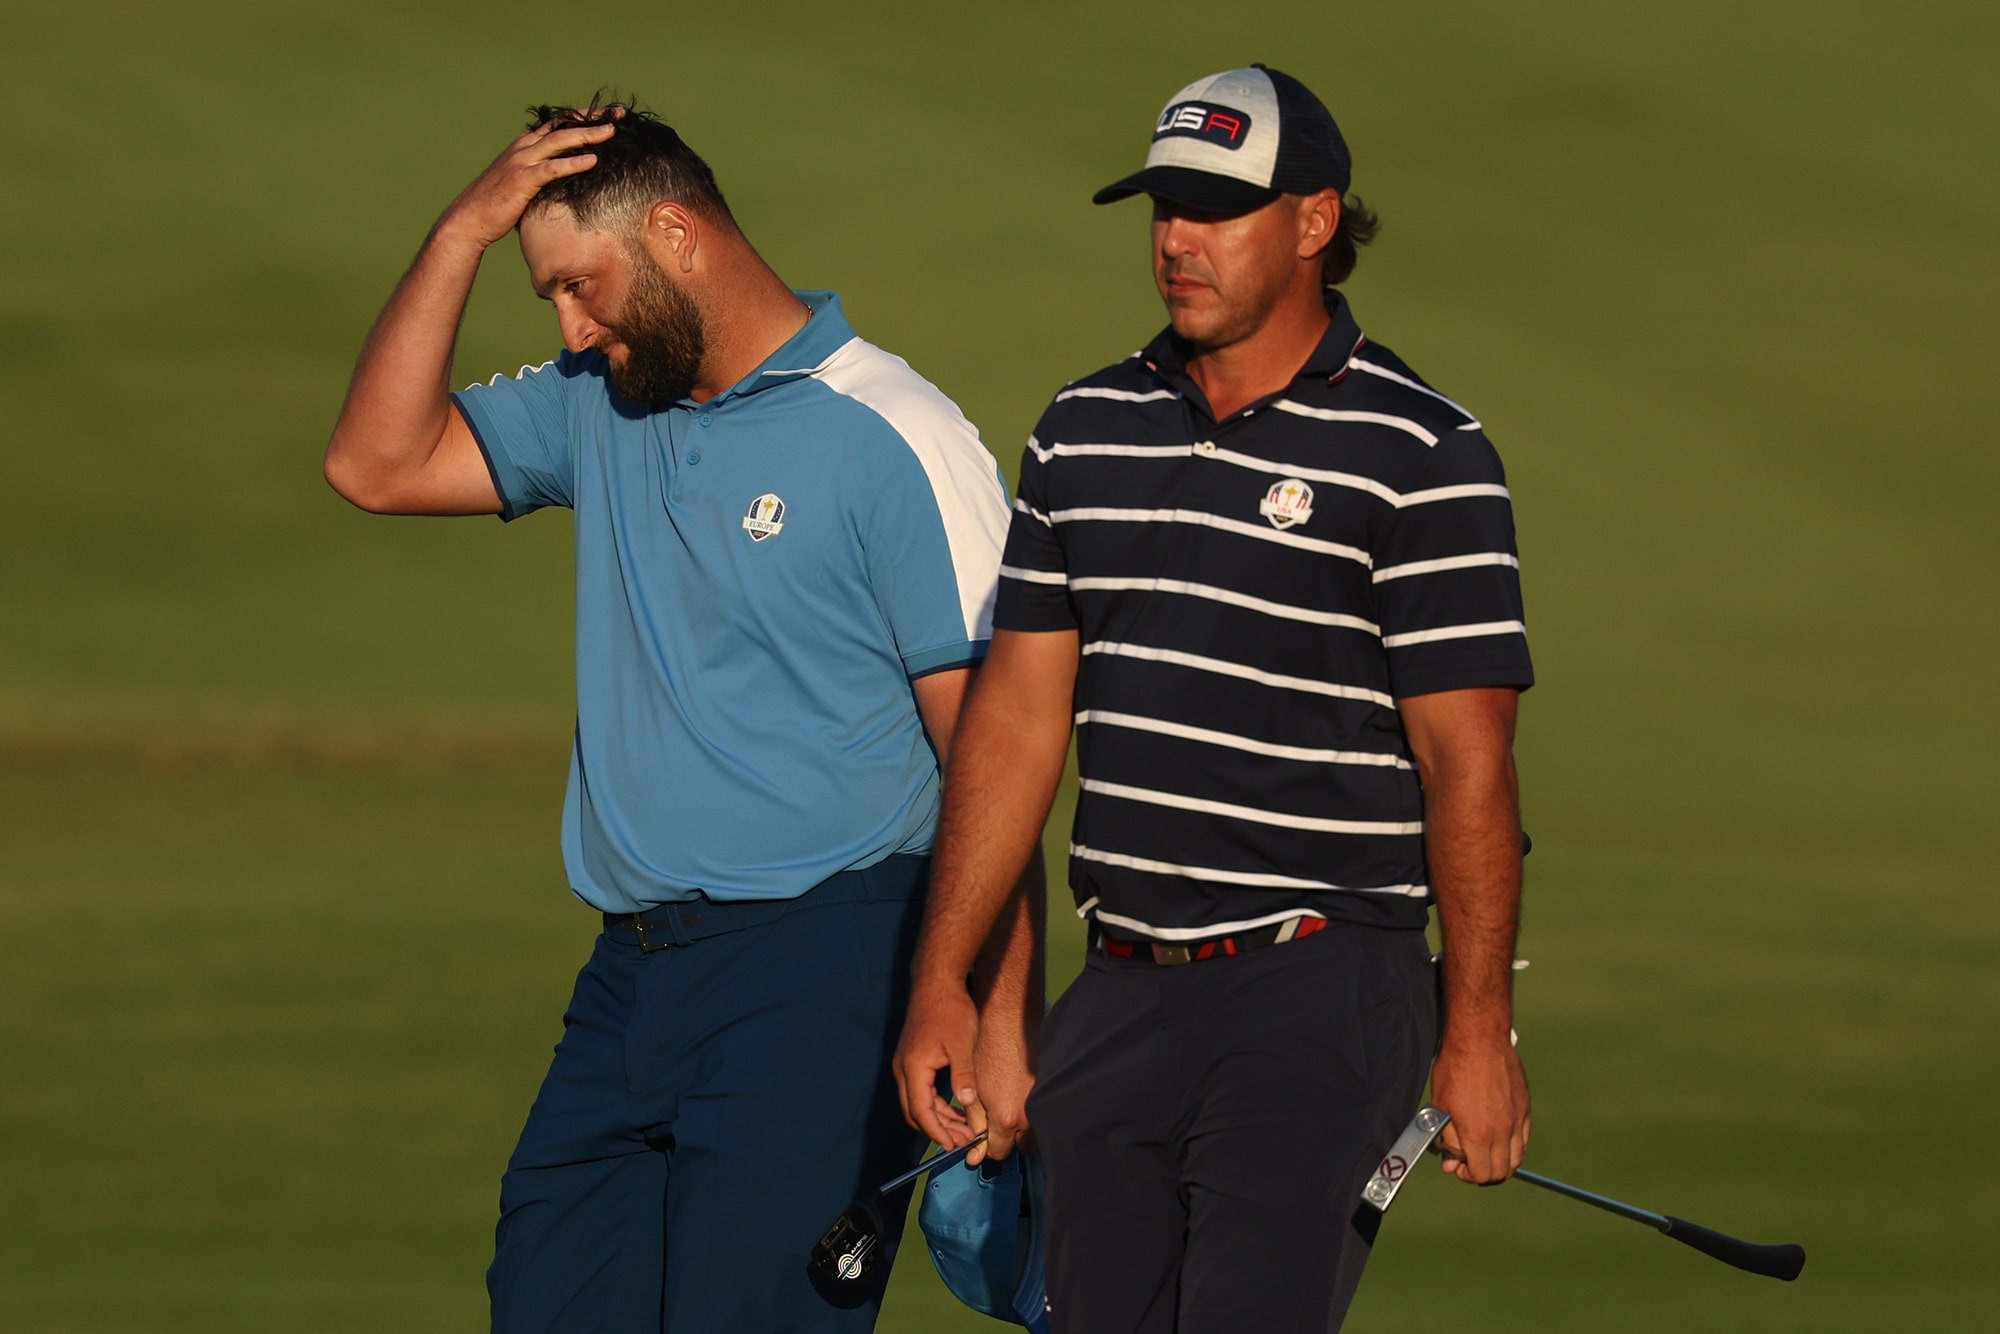 'Act like a child': Brooks Koepka hits out at Jon Rahm at Ryder Cup